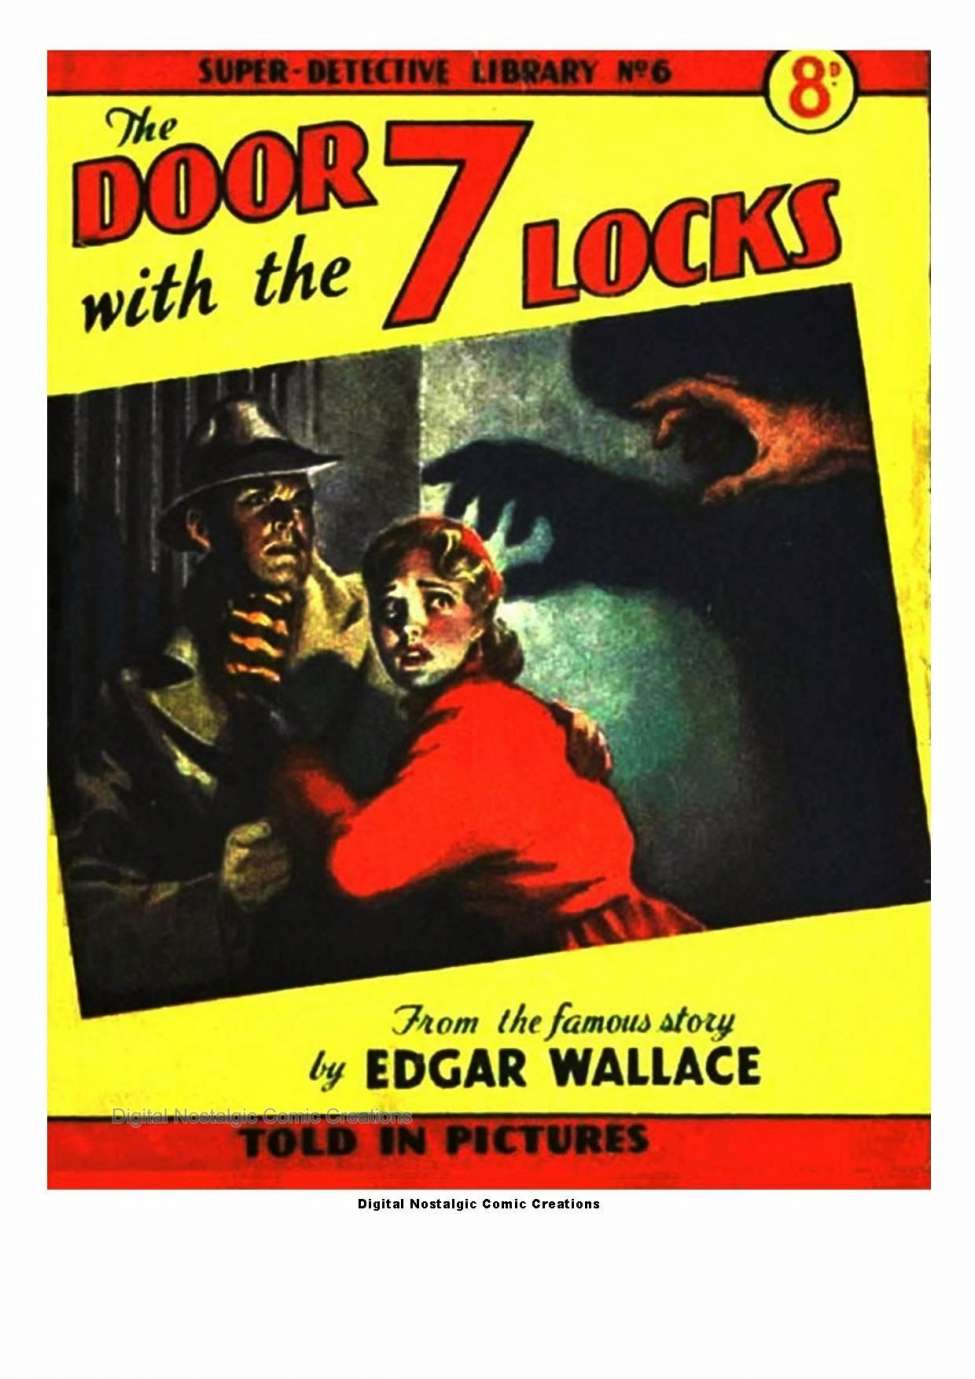 Book Cover For Super Detective Library 6 - The Door with 7 Locks